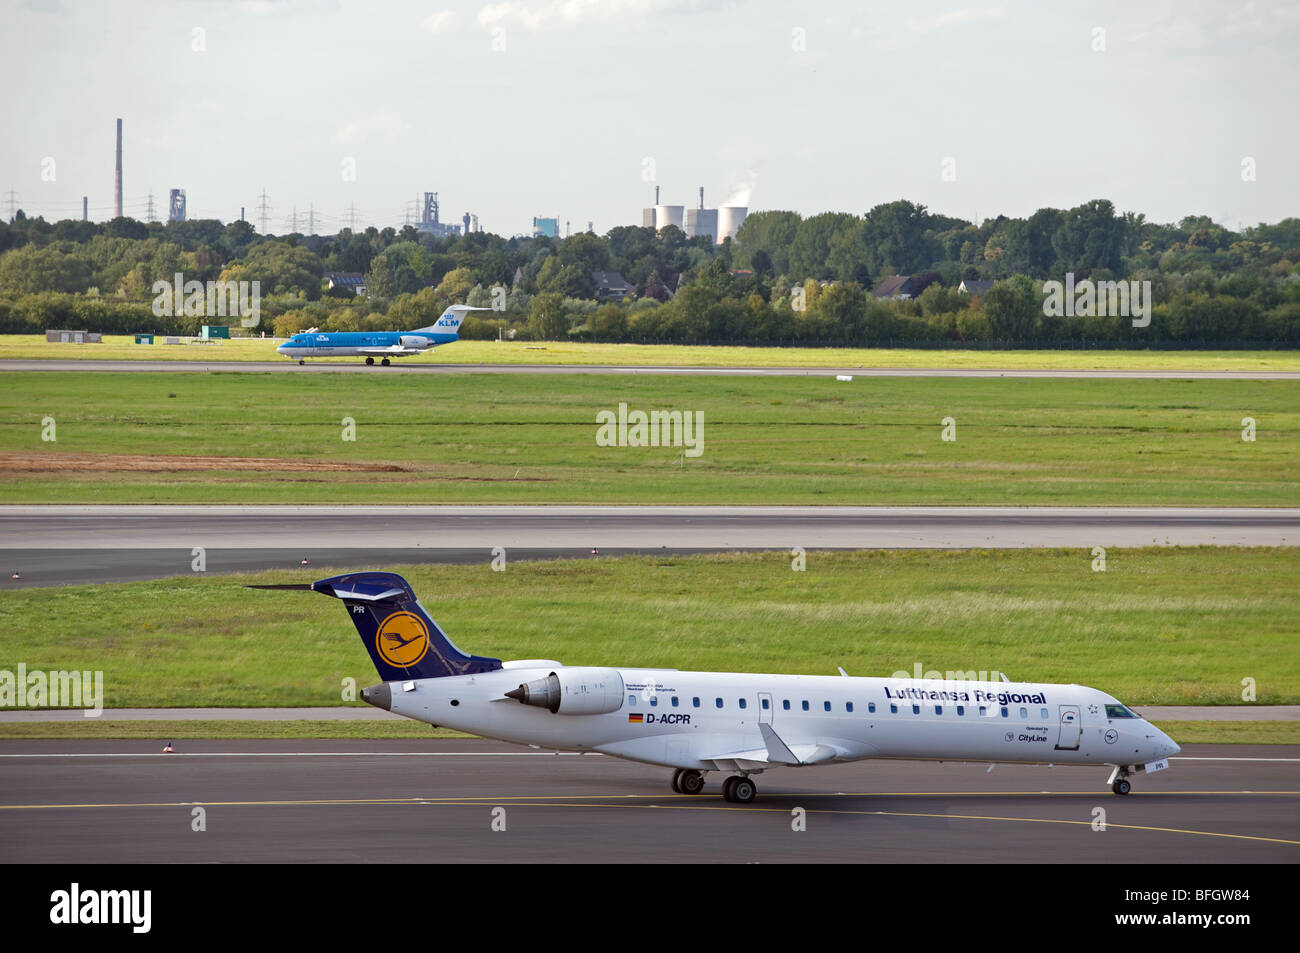 Lufthansa Regional passenger airliner taxiing at Dusseldorf International Airport, Germany. Stock Photo